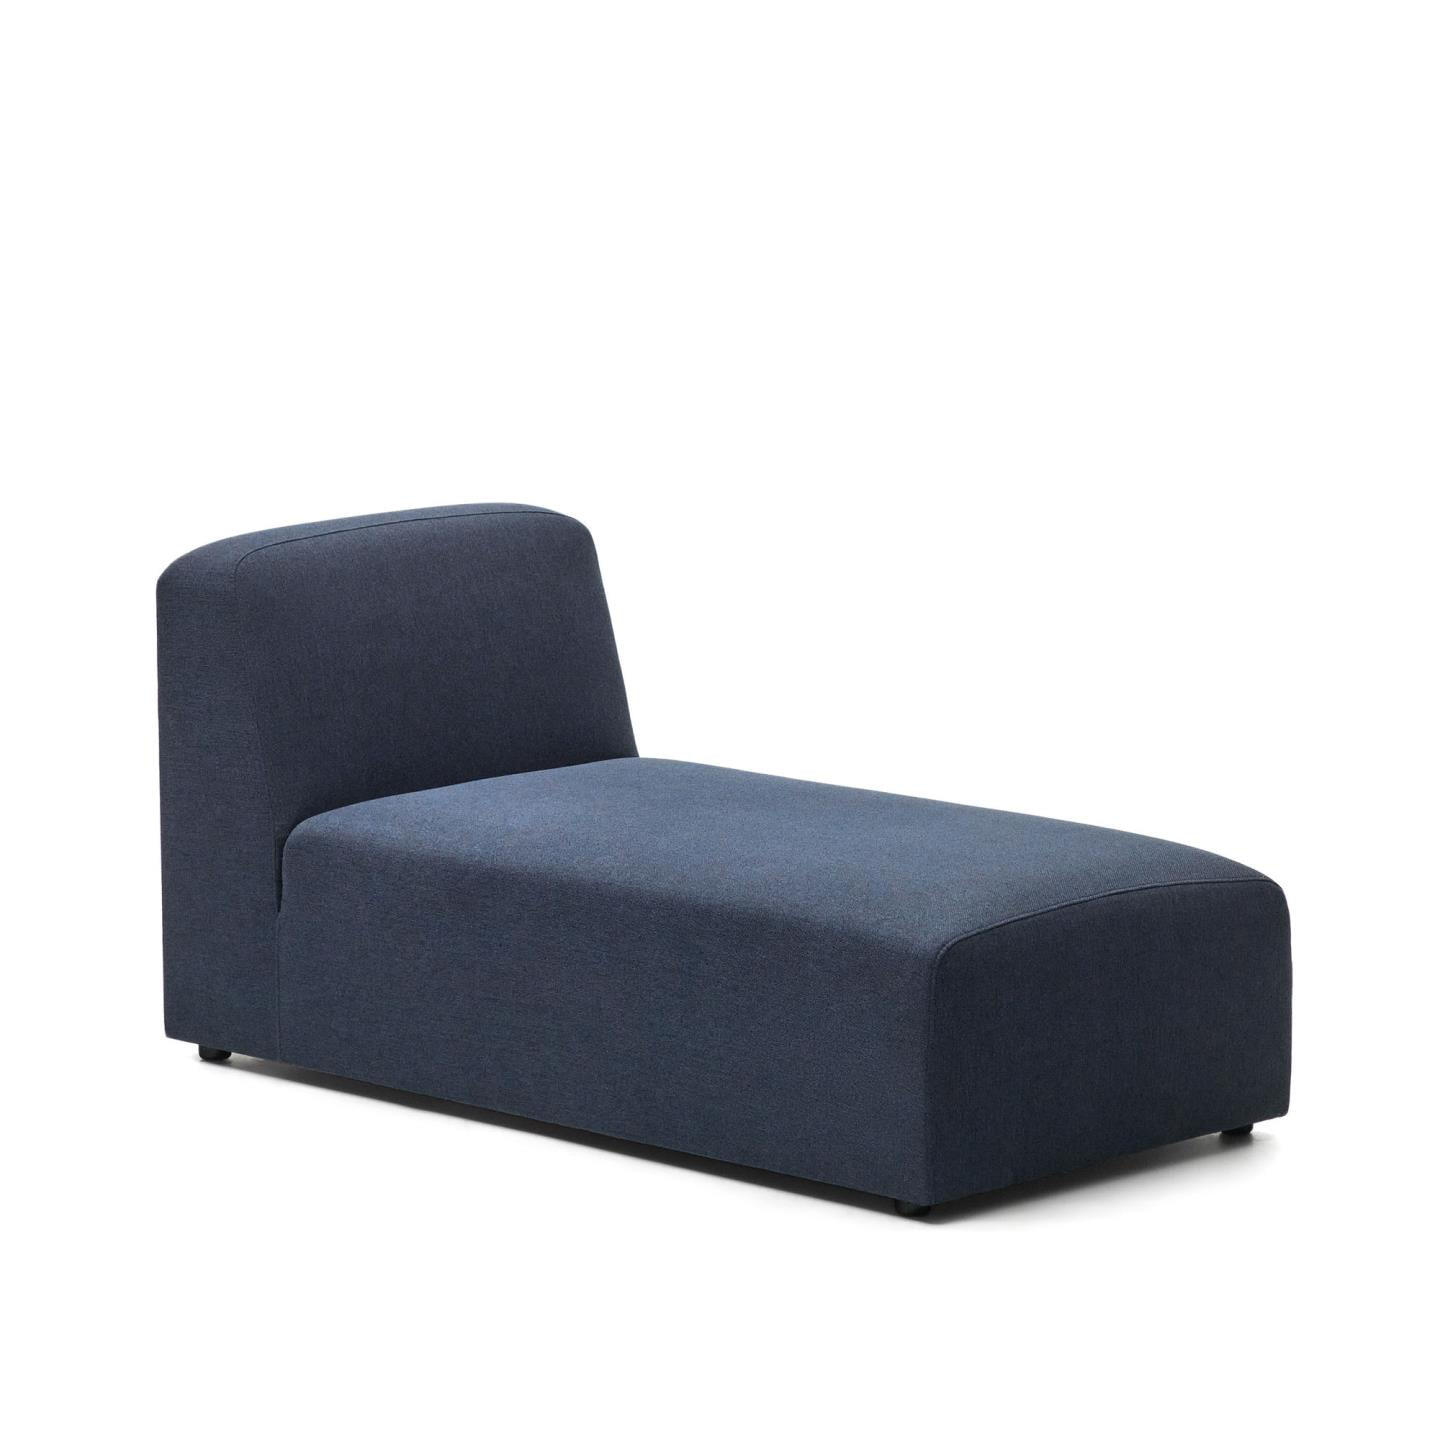 Kave Home Chaise Longue Neom - Donkerblauw